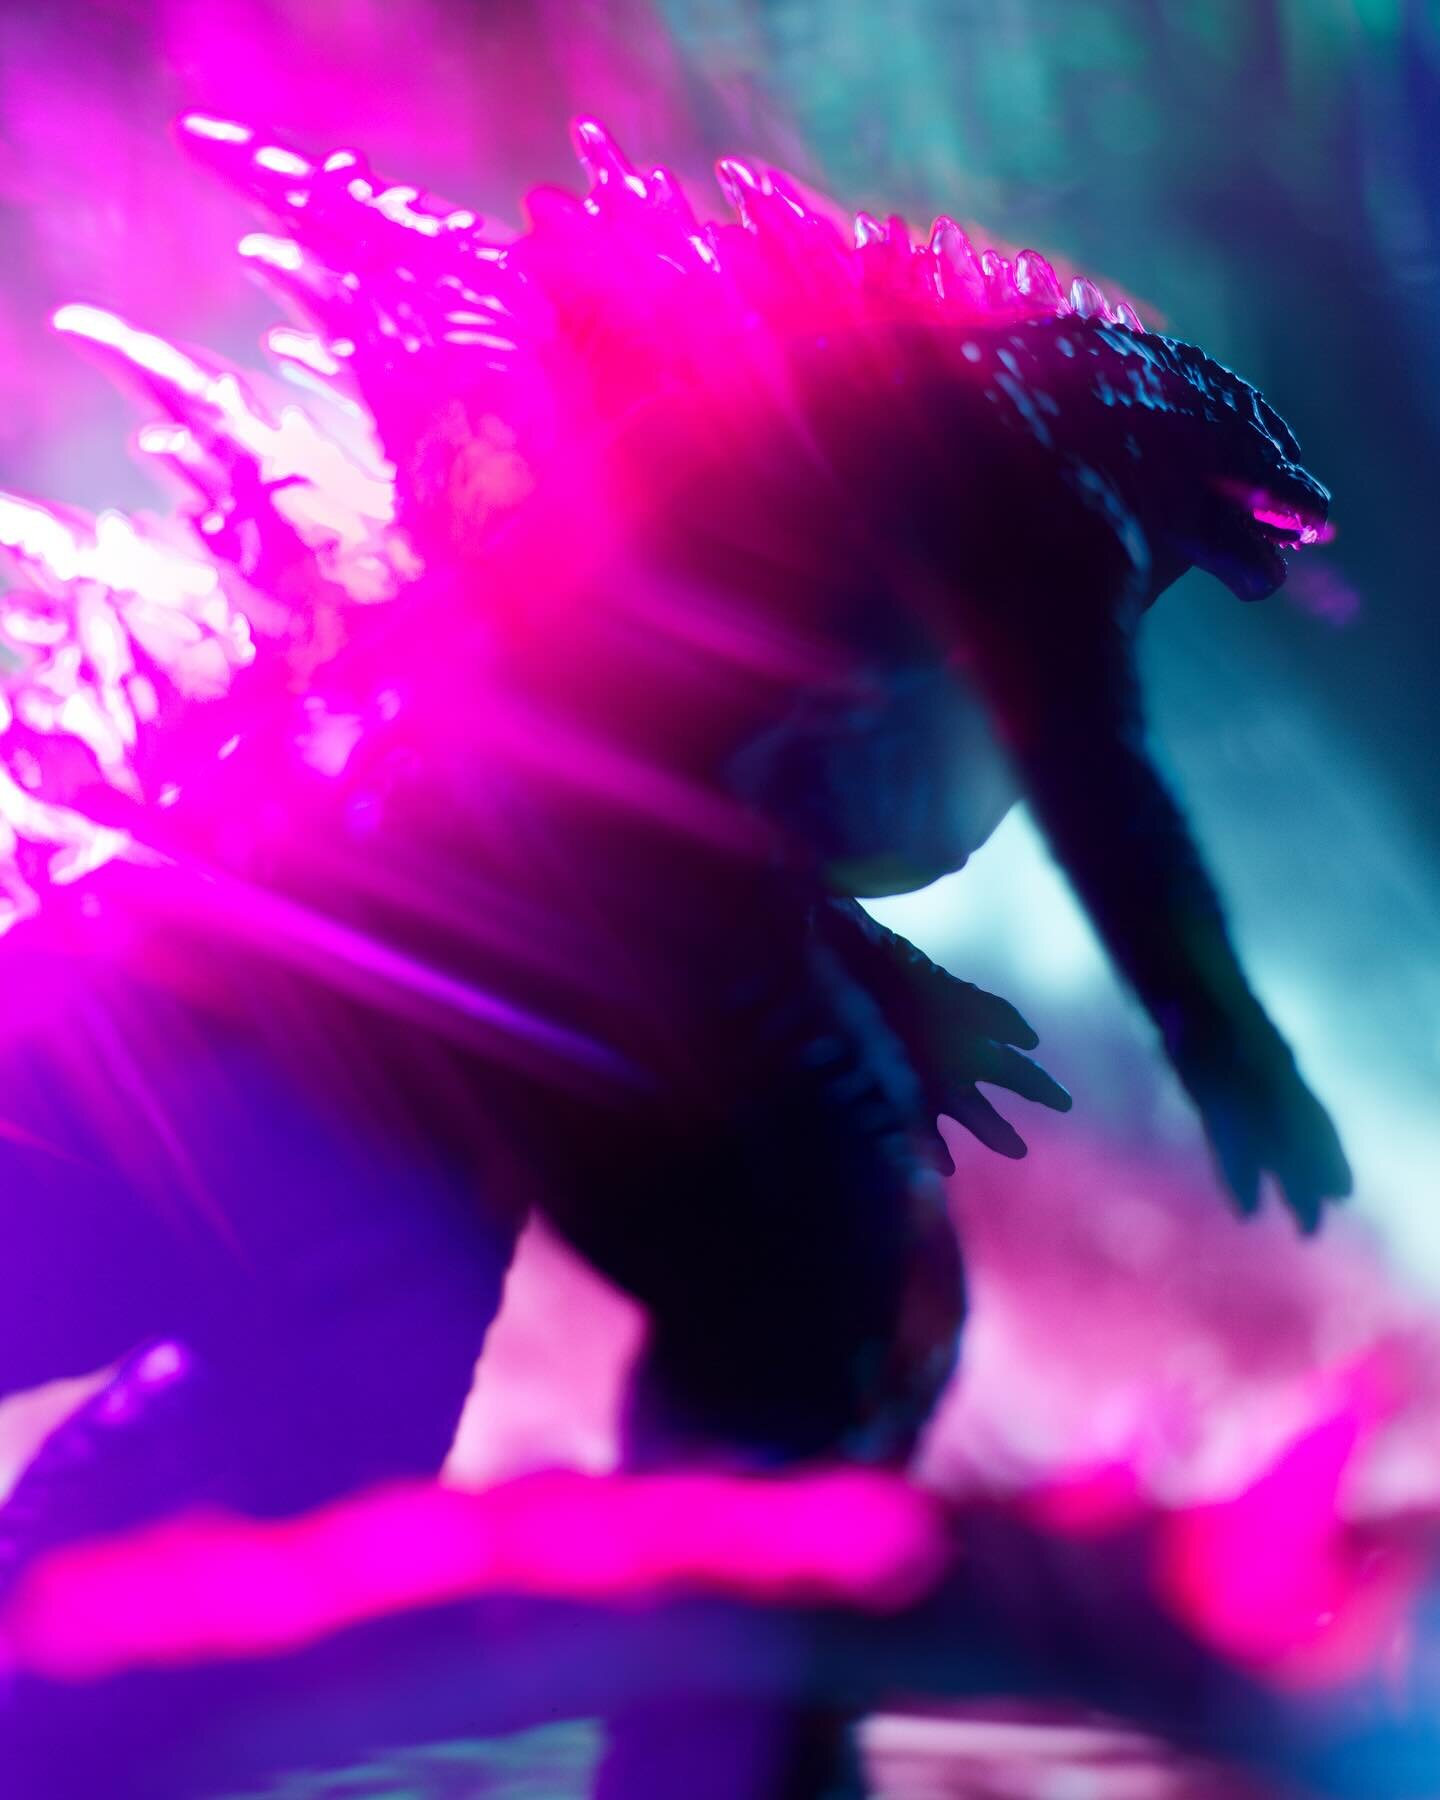 This isn&rsquo;t even my final form. 💪🏻

Toy photography of the @playmatestoysinc GIANT Godzilla Evolved figure from @godzillaxkong. Lit by @ulanzi_official lights with some fun in camera effects.

#godzilla #gxk #godzillaxkong @godzilla_toho #play